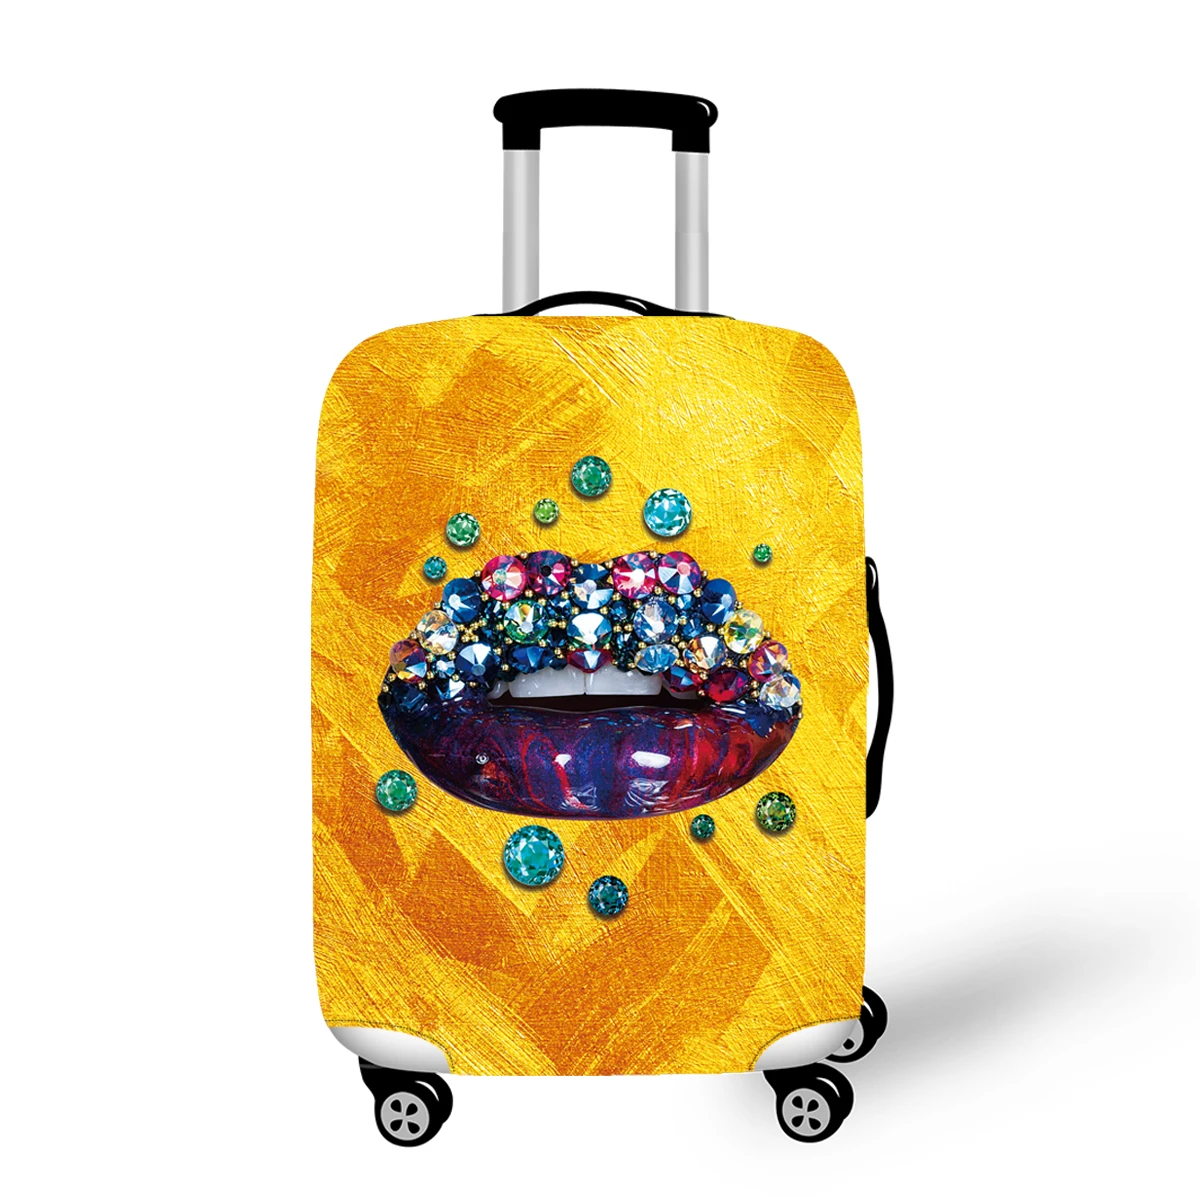 

New products sublimation covers luggage big lip design print travel luggage cover anti dust size S/M/L for choose, Full printing color